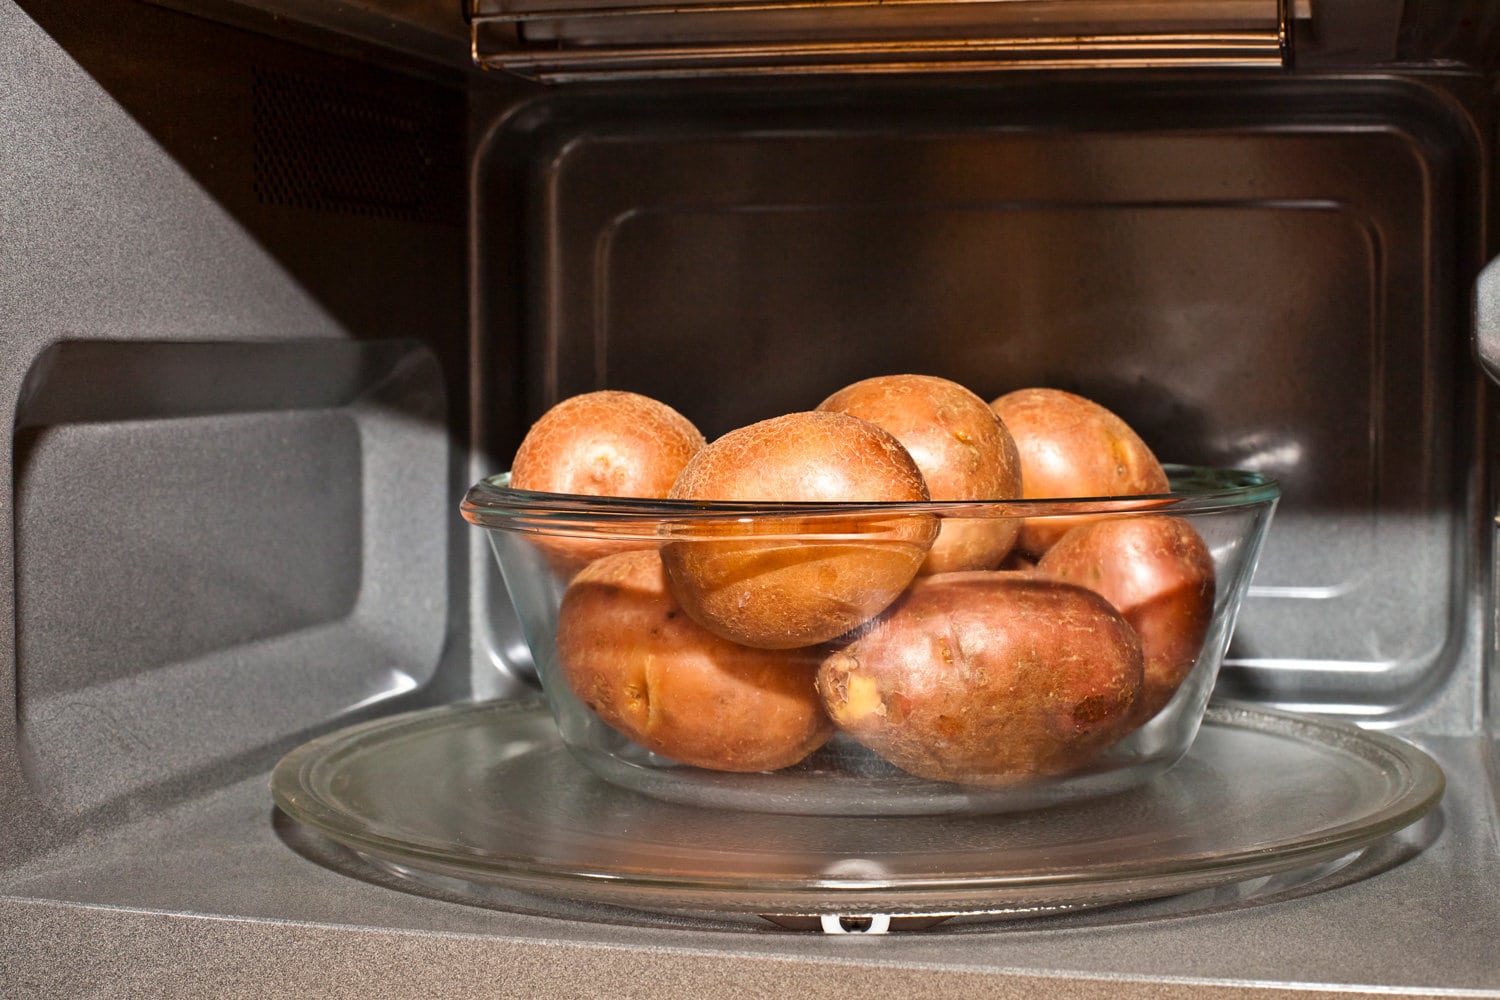 Potato tubers in the microwave